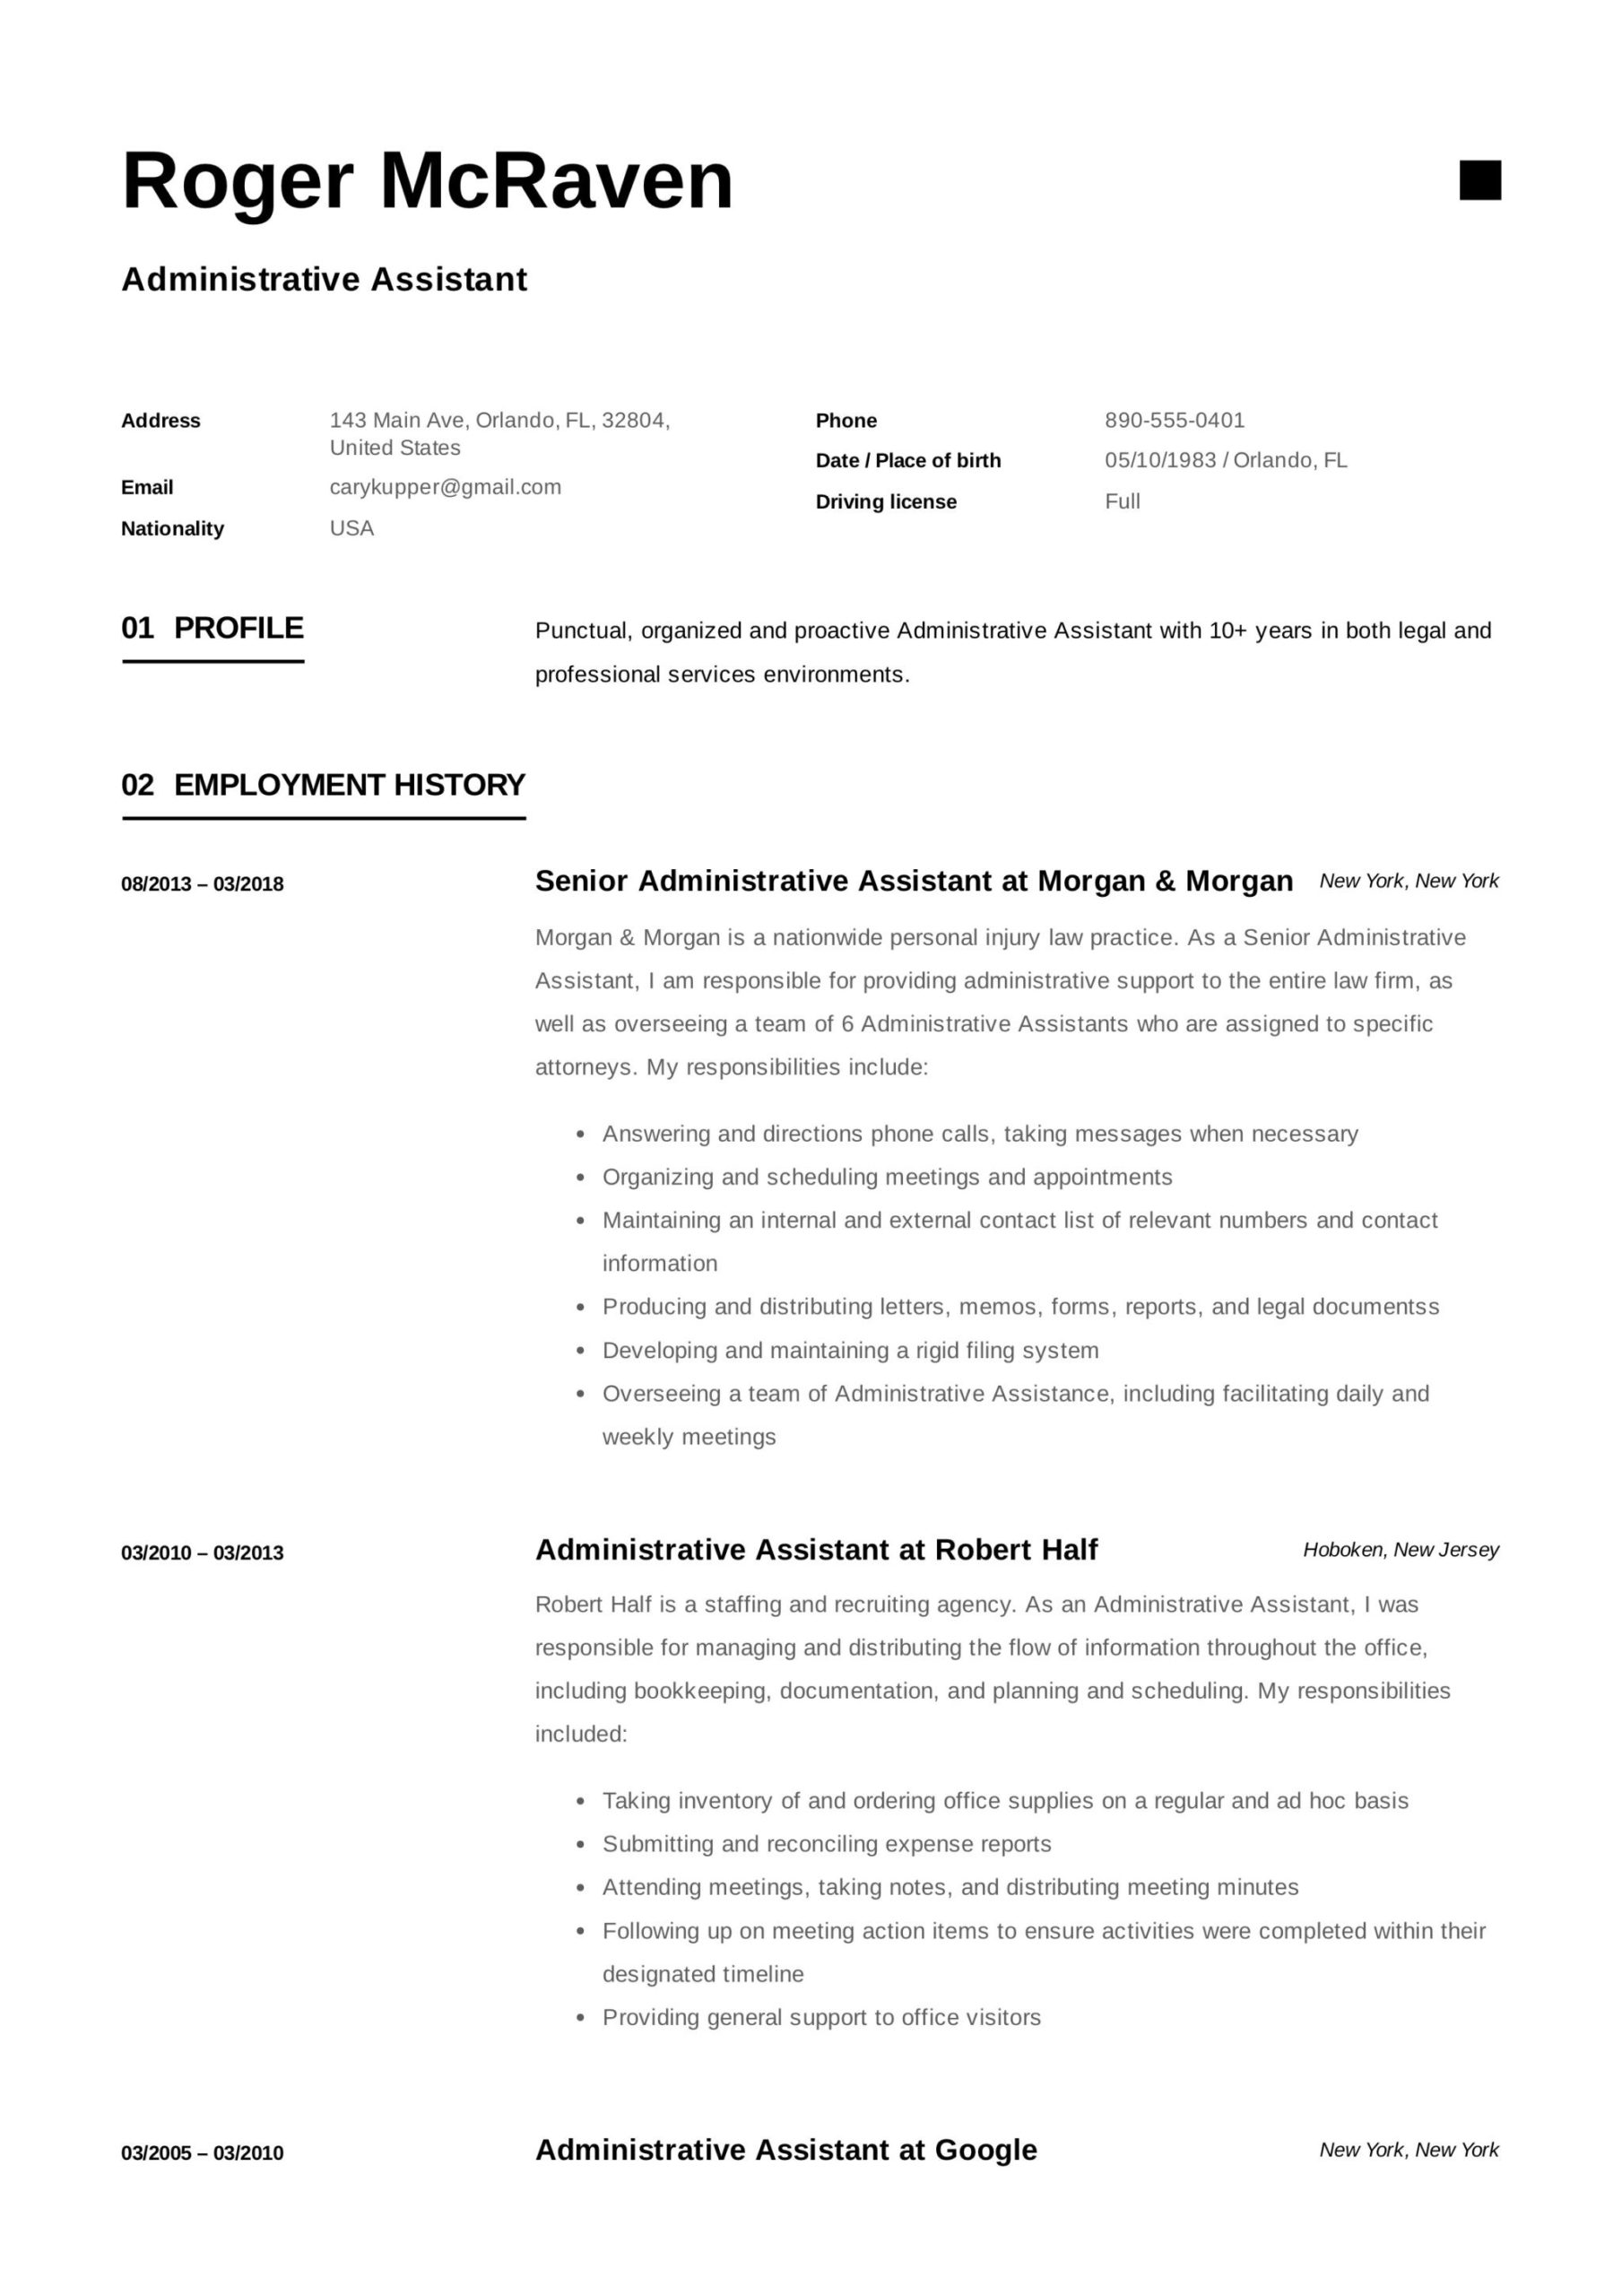 Samples Of Entry Level Resumes for Administrative Professionals 19 Administrative assistant Resumes & Guide Pdf 2022